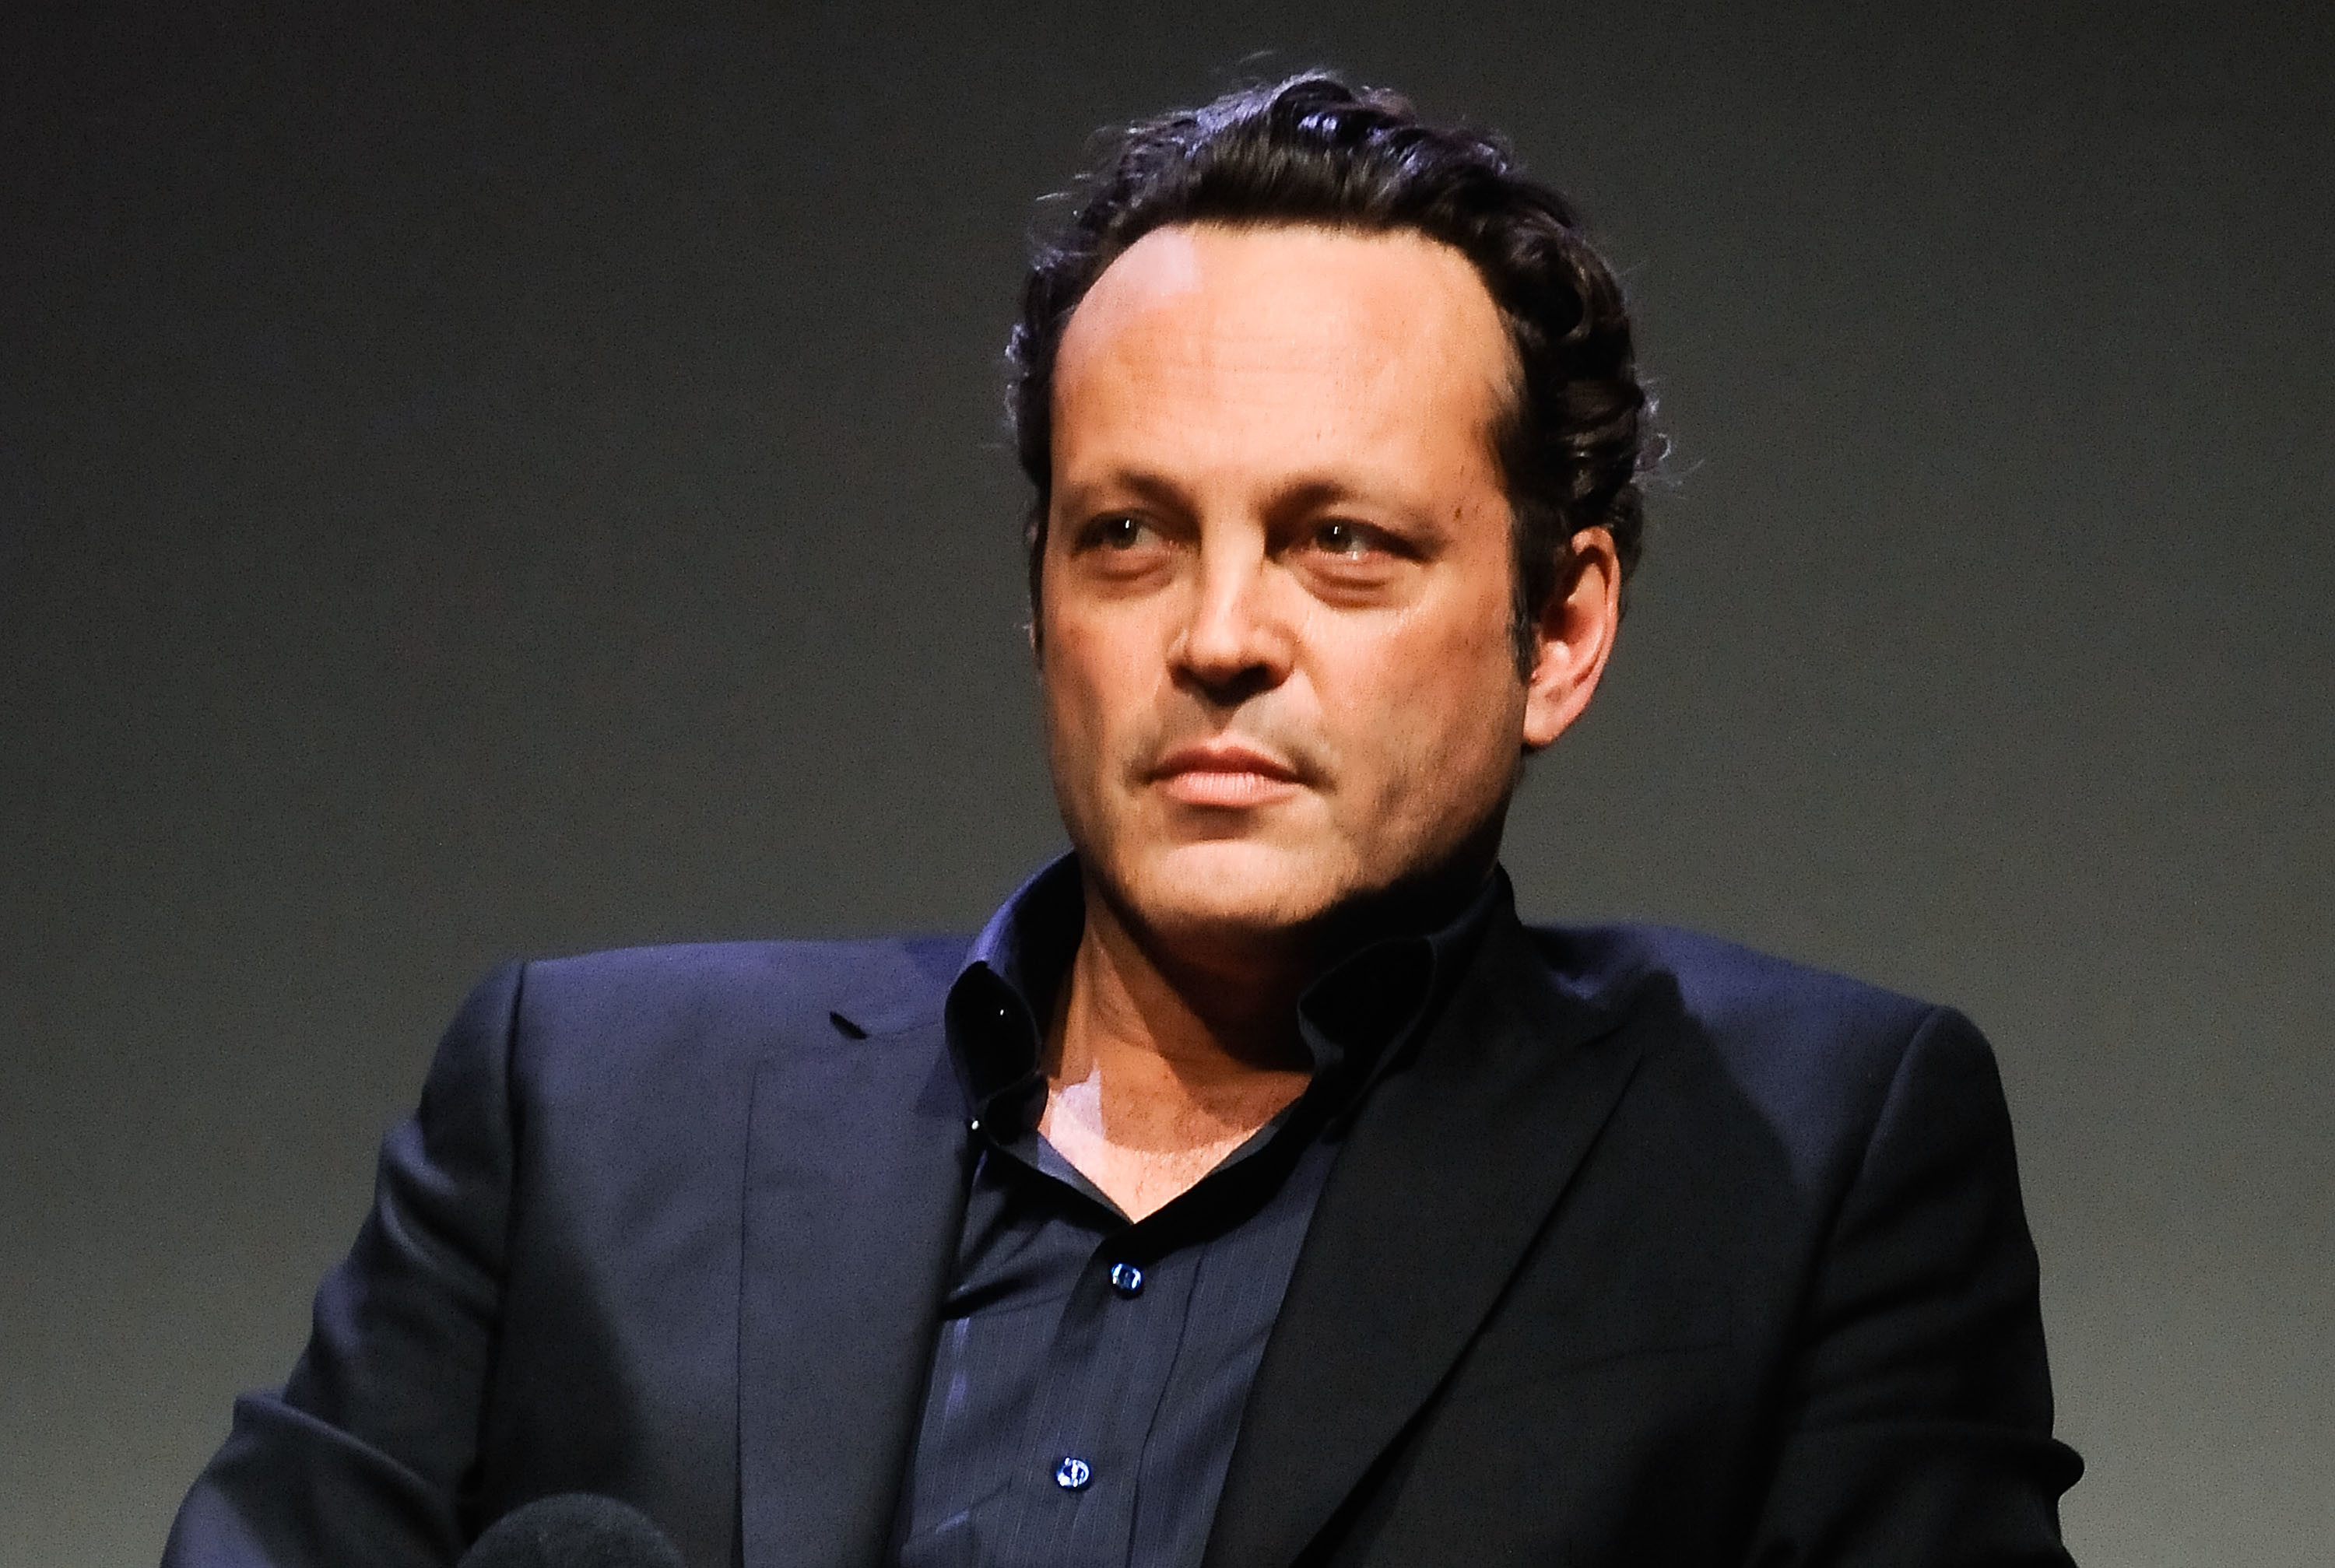 3000x2015 Vince Vaughn To Be Honored At John Wayne Cancer Institute Odyssey Ball